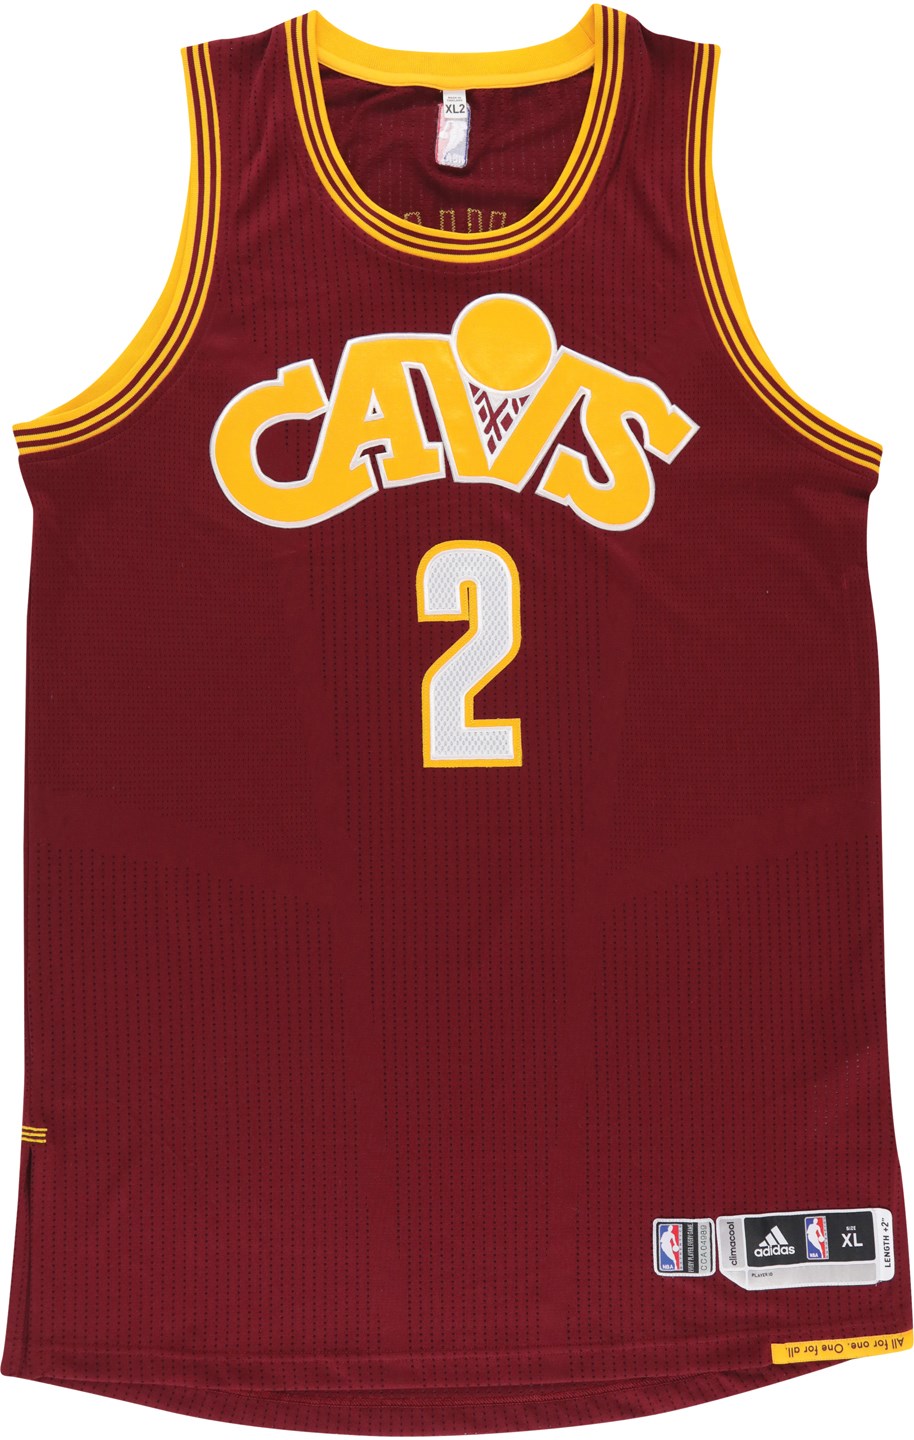 2016 Kyrie Irving Cleveland Cavaliers Team Issued Jersey